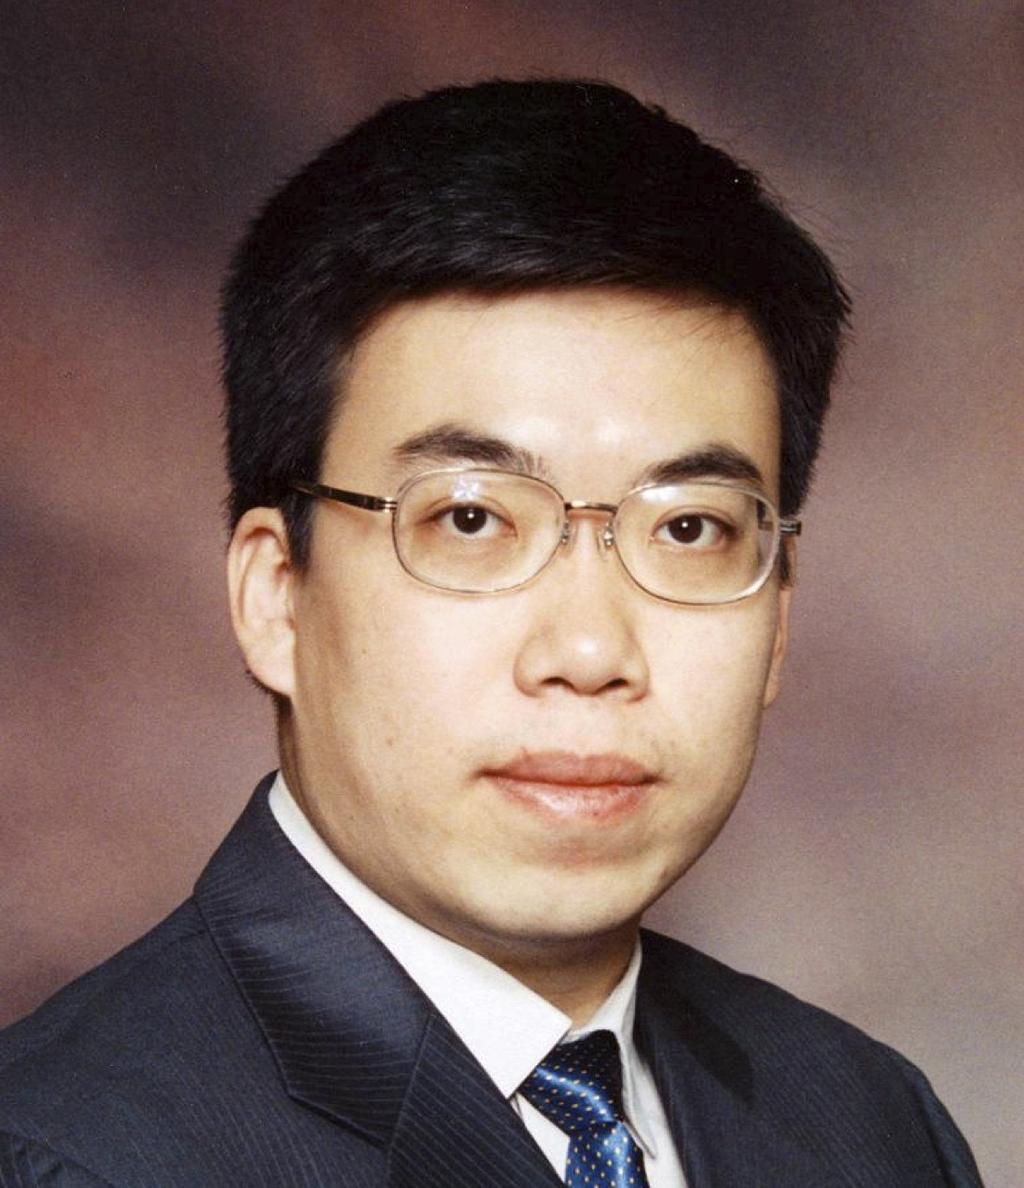 Jiawei Huag S, M 6, SM, F 6) i a IEEE Fellow, a Ditiguihed Lecturer of IEEE Commuicatio Society, ad a Thomo Reuter Highly Cited Reearcher i Computer Sciece.